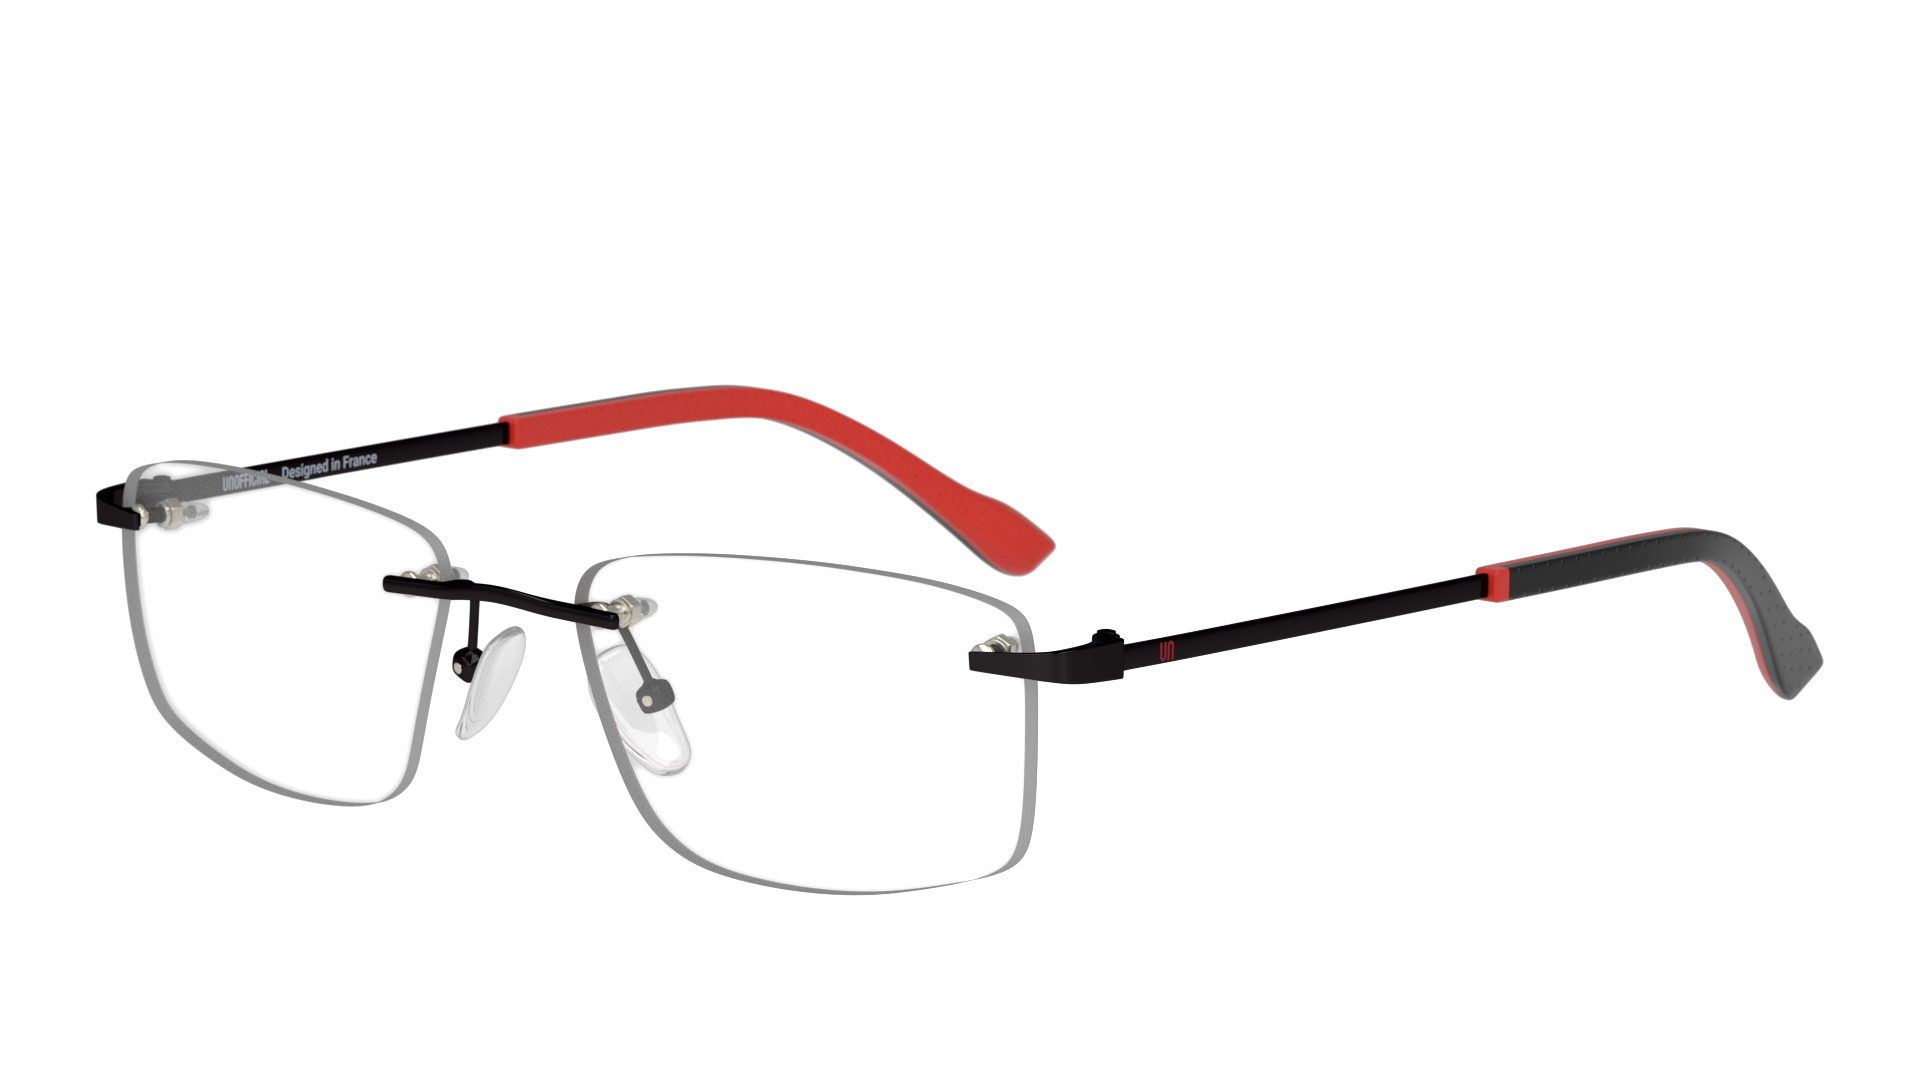 Angle_Left01 Unofficial UNOM0088 (GG00) Glasses Transparent / Grey